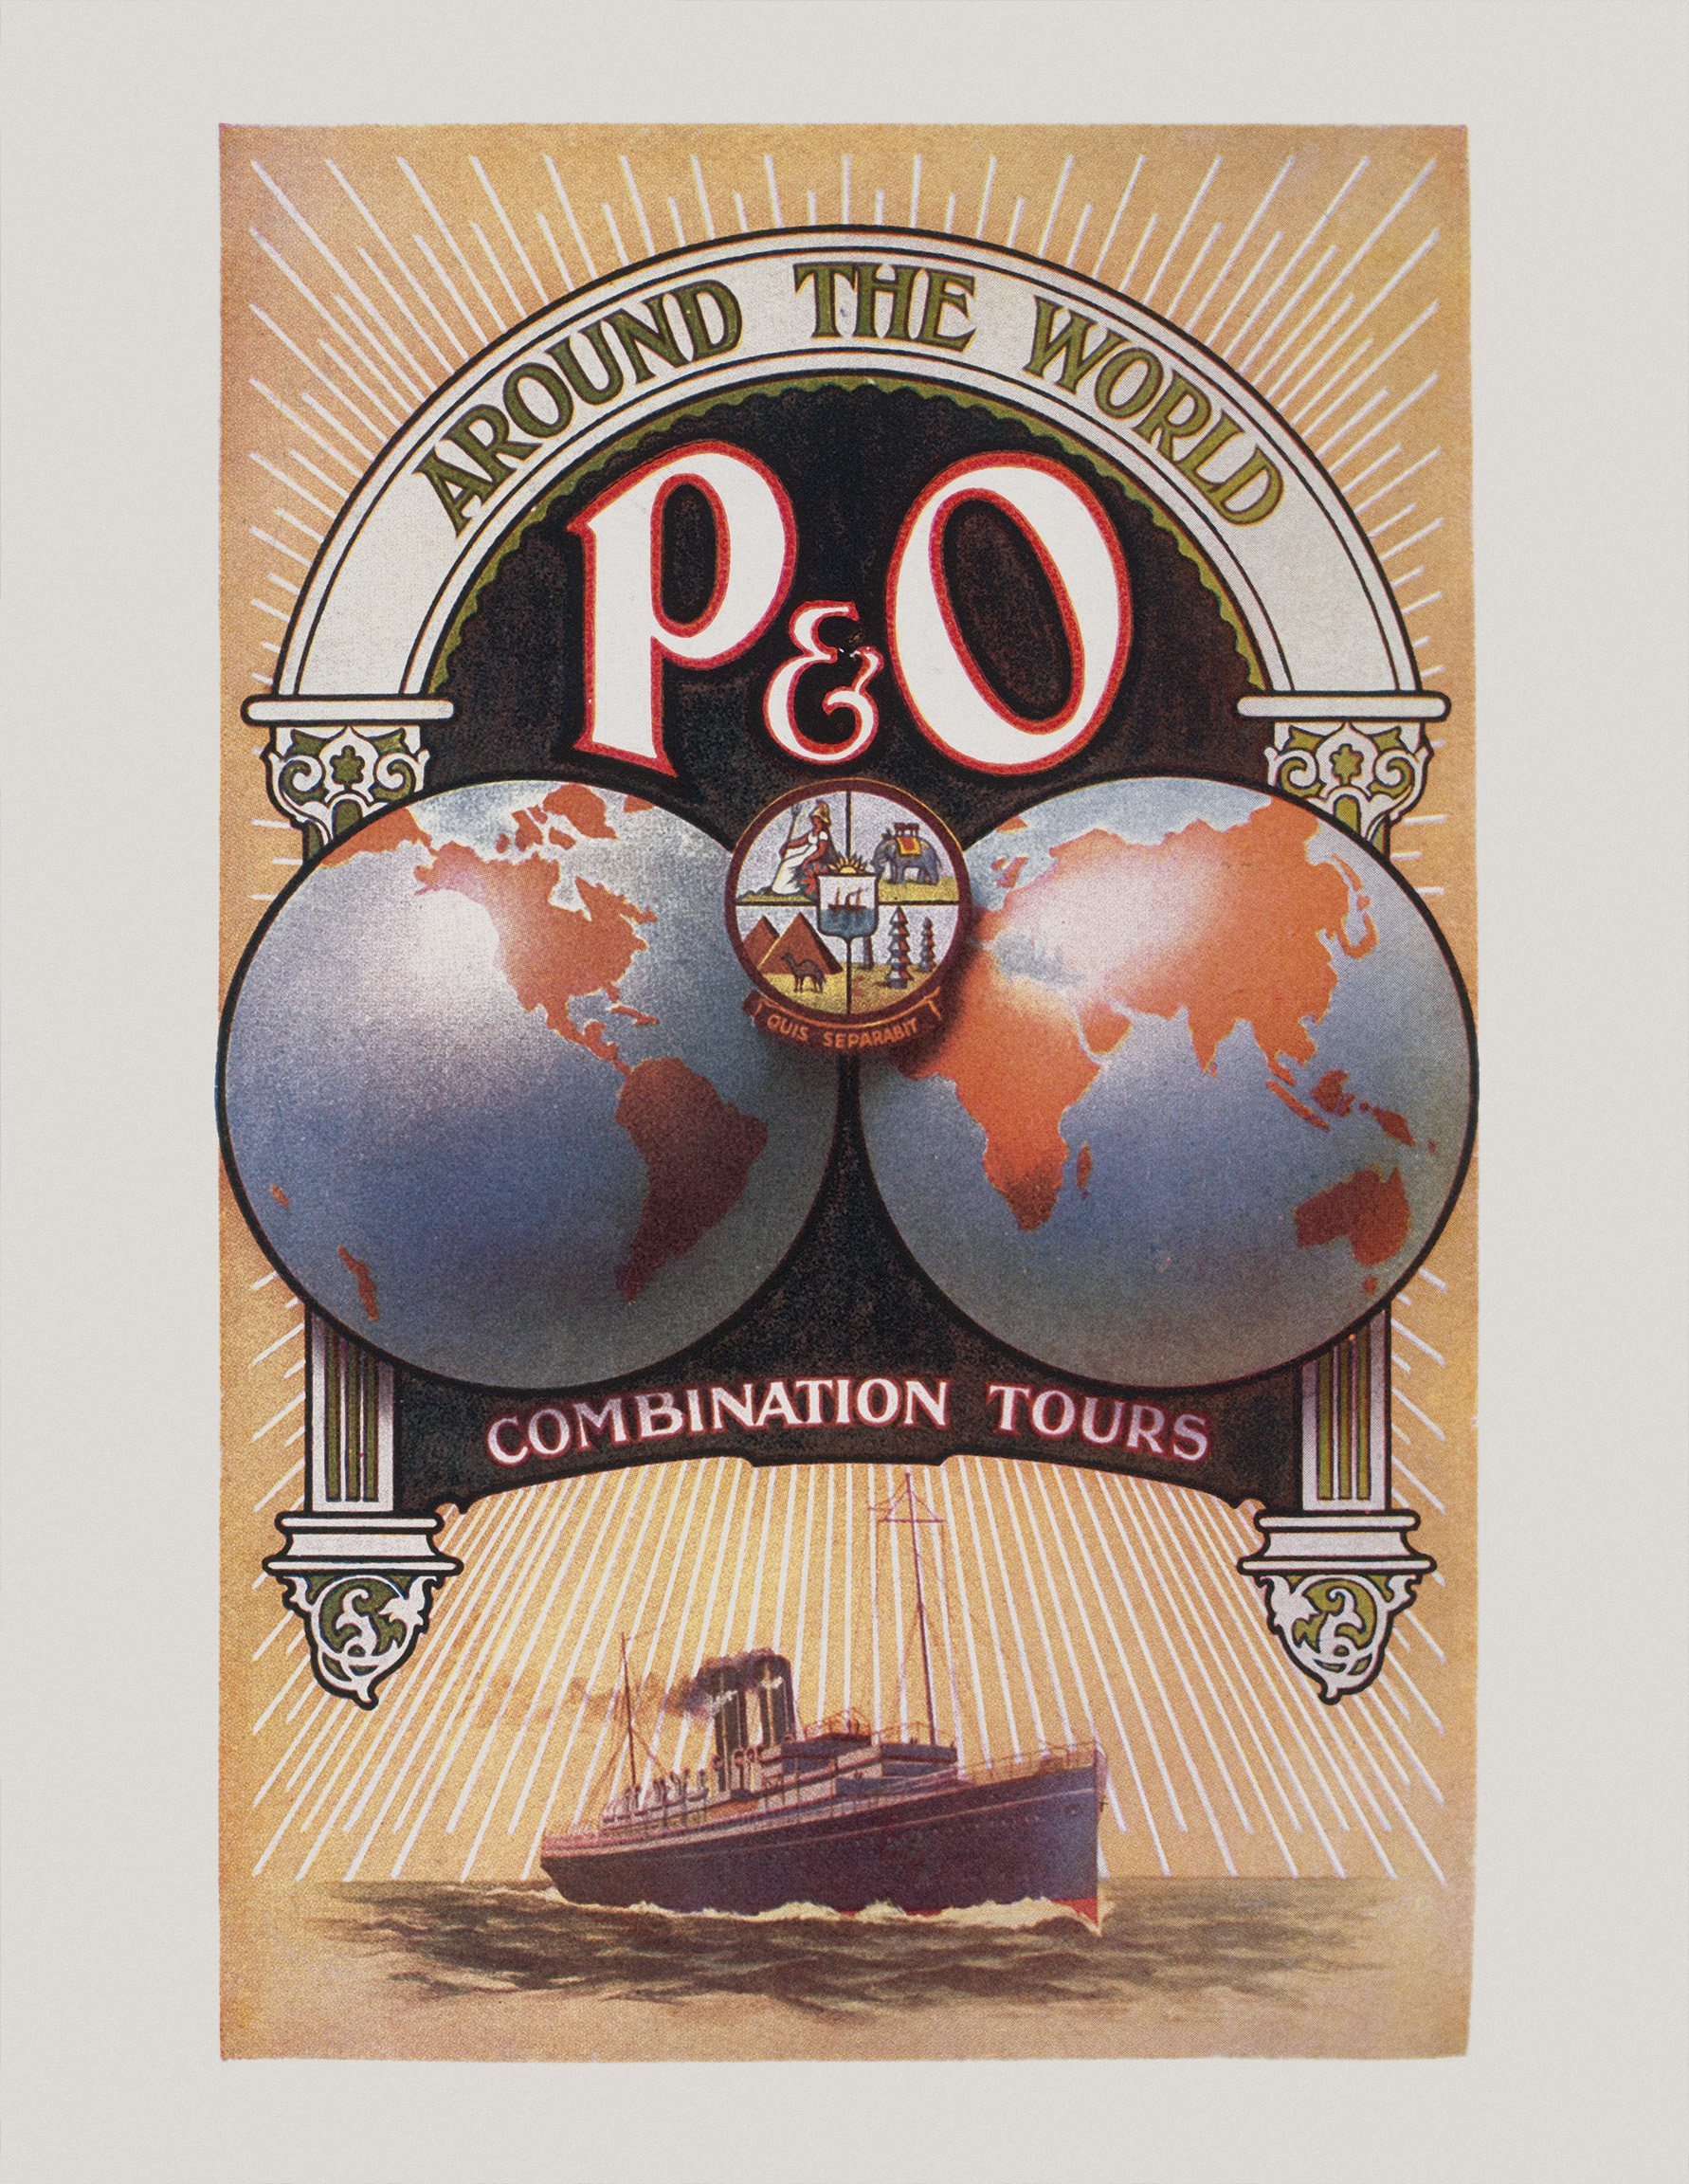 Original brochure for P&O’s sailing schedules and ‘Combination Tours’, issued in 1914. jpg